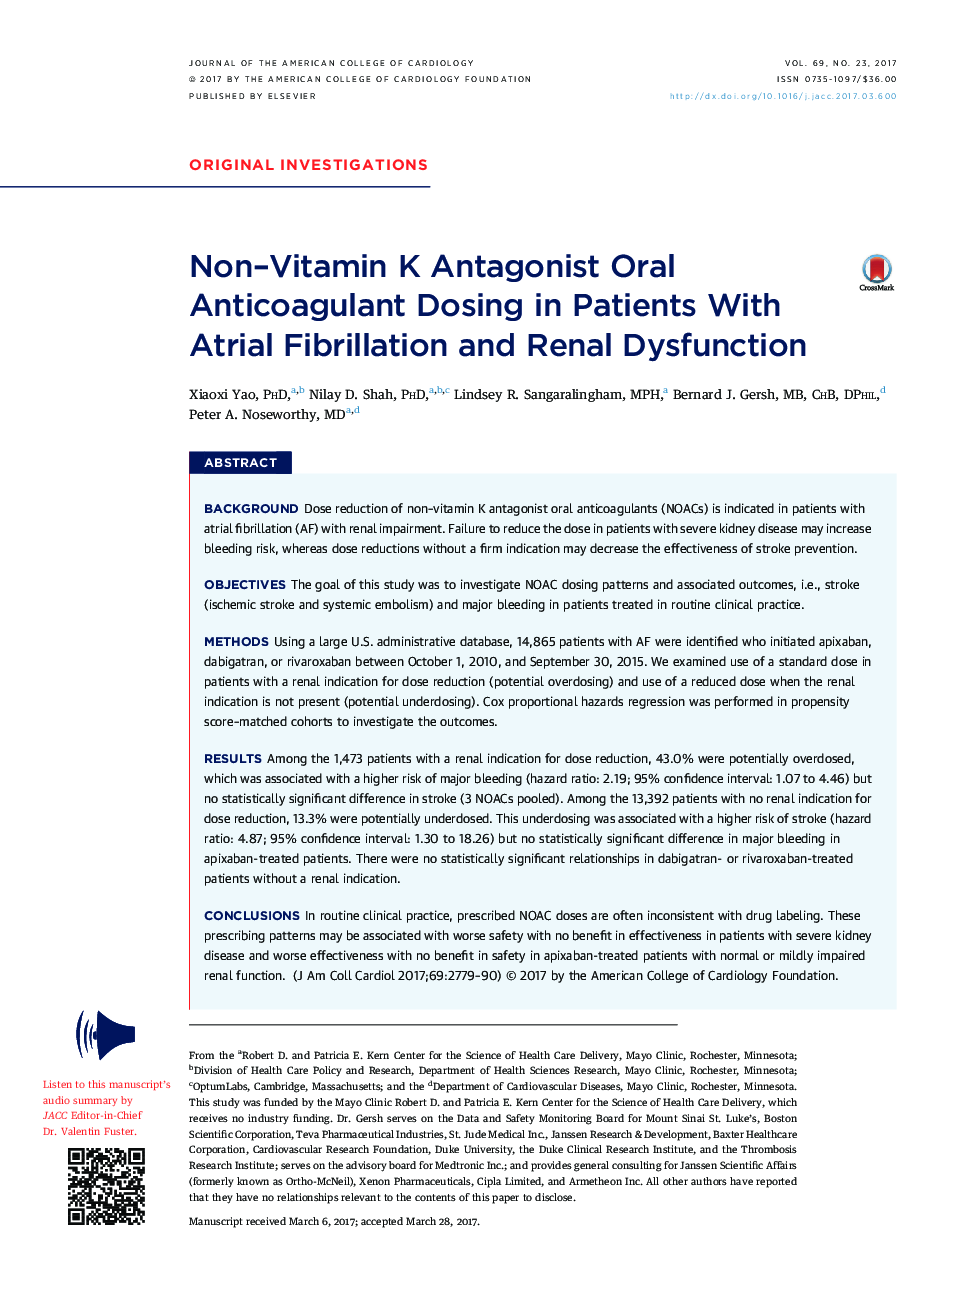 Non-Vitamin K Antagonist Oral Anticoagulant Dosing in Patients With Atrial Fibrillation and Renal Dysfunction